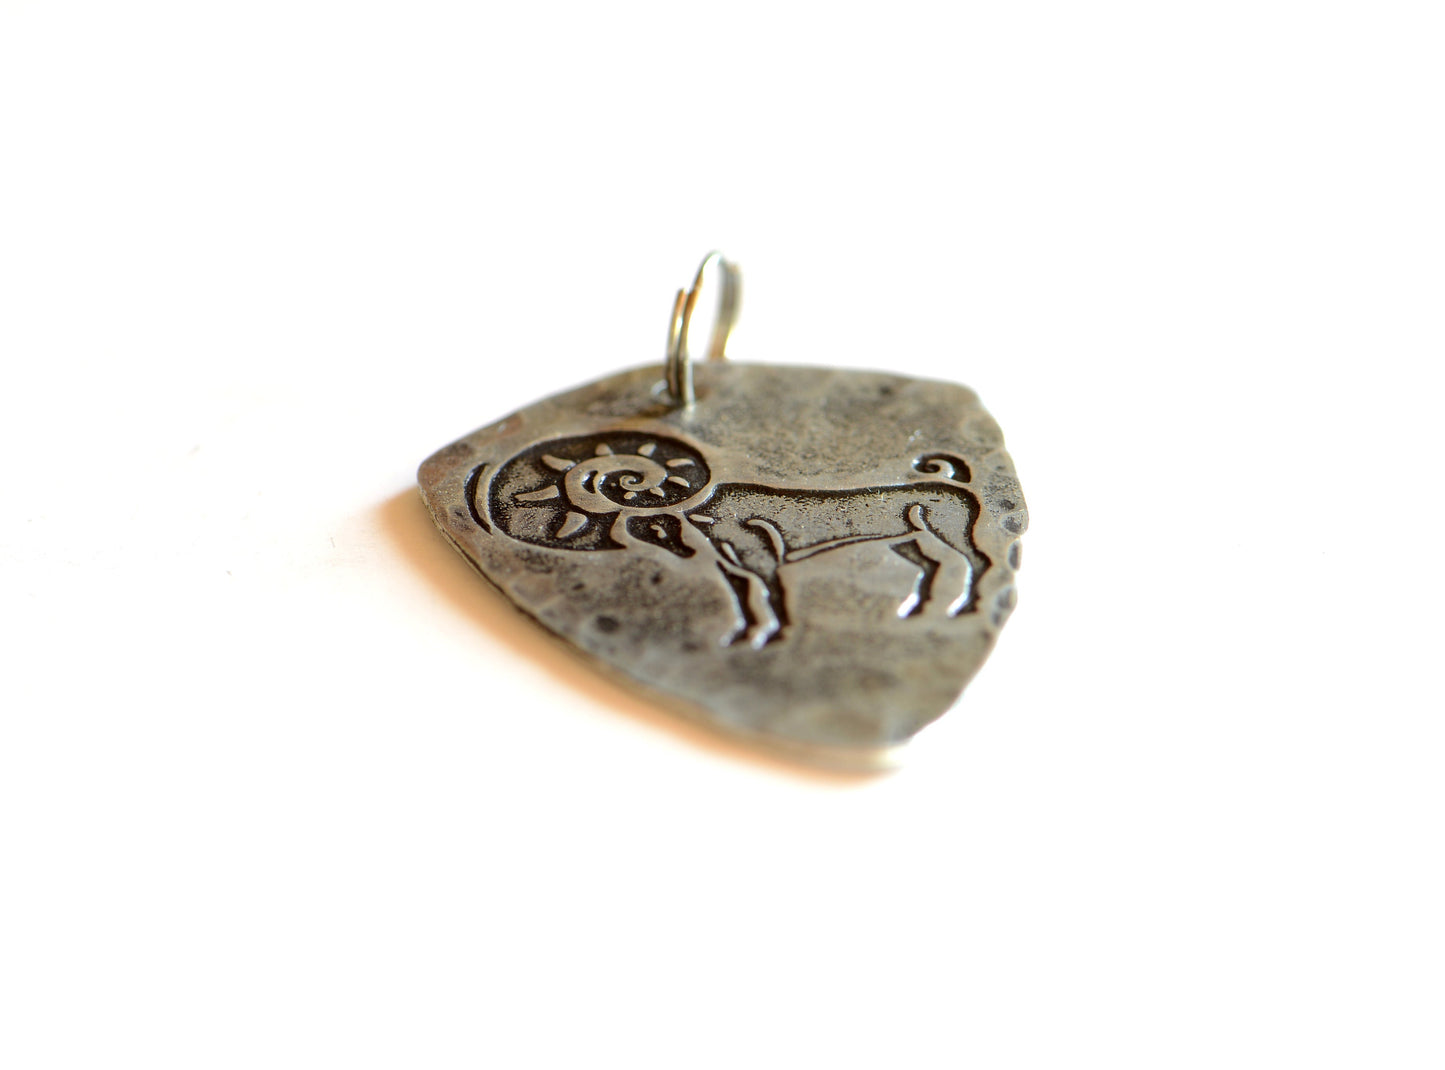 Zodiac sign sterling silver necklace - Aries as shown but can be customized to any astrology signs